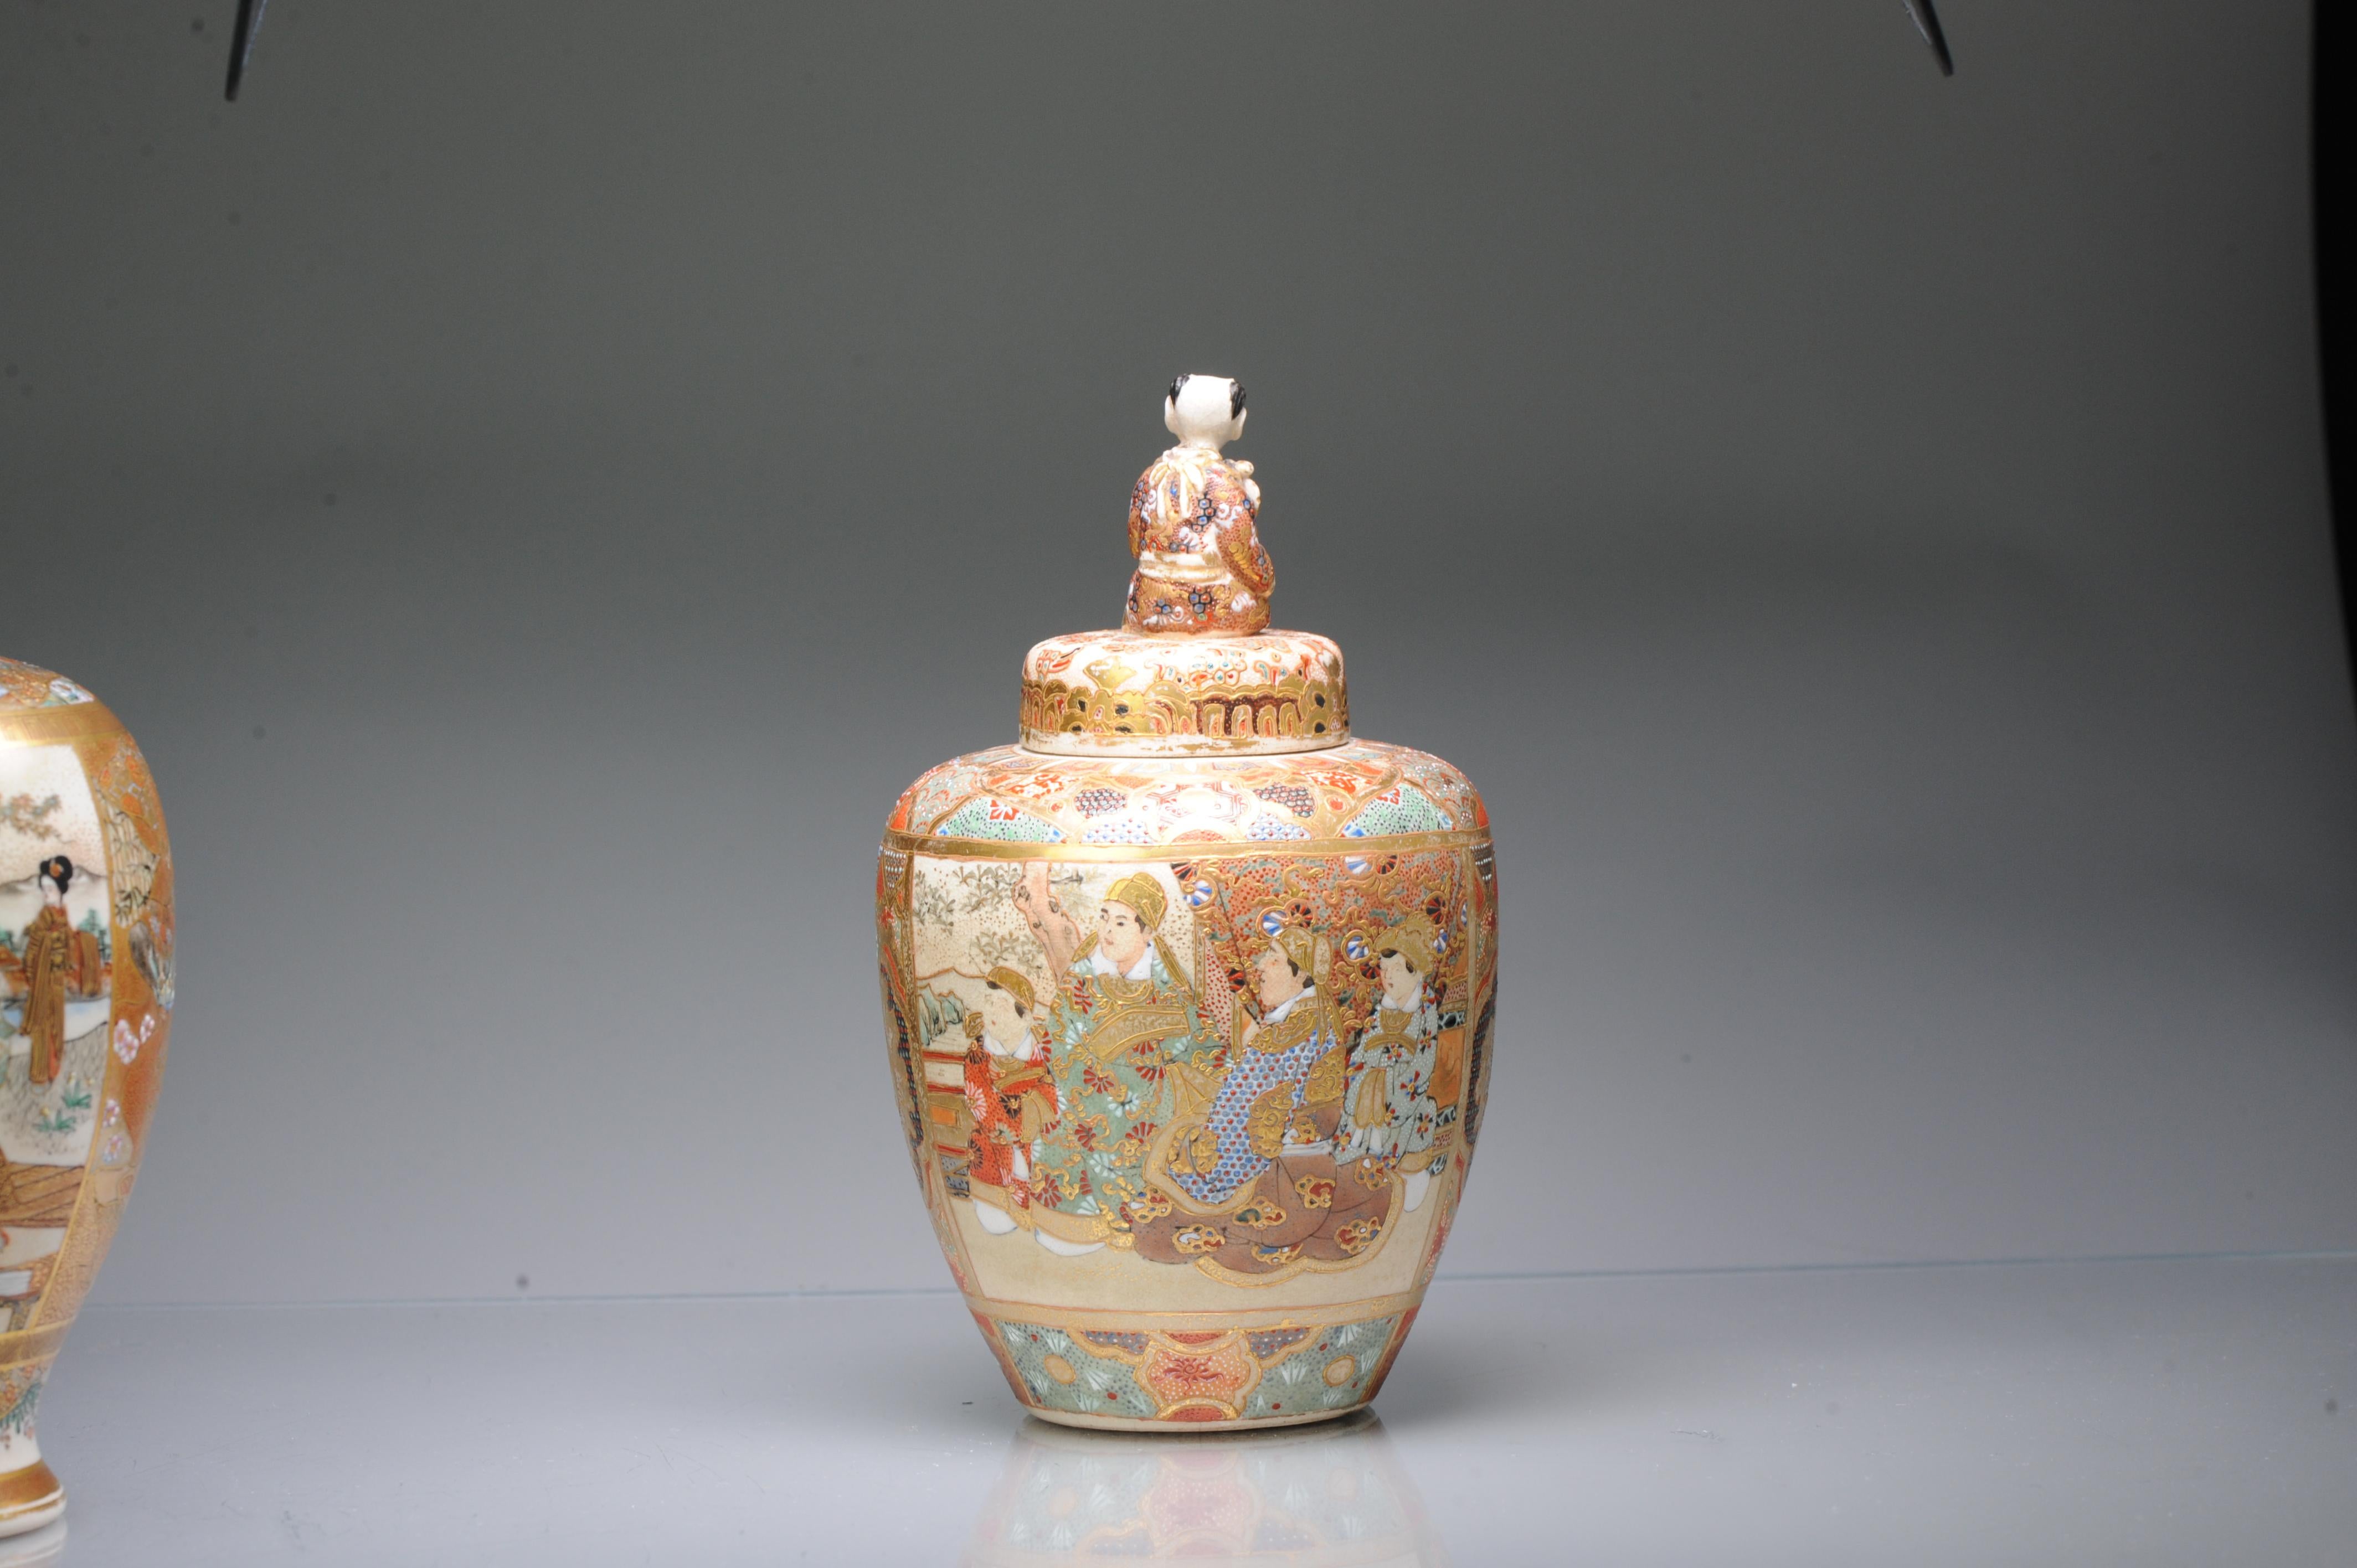 Porcelain Antique Ca 1900 Japanese Satsuma Jar with Figures Richly Decorated Unmarked For Sale